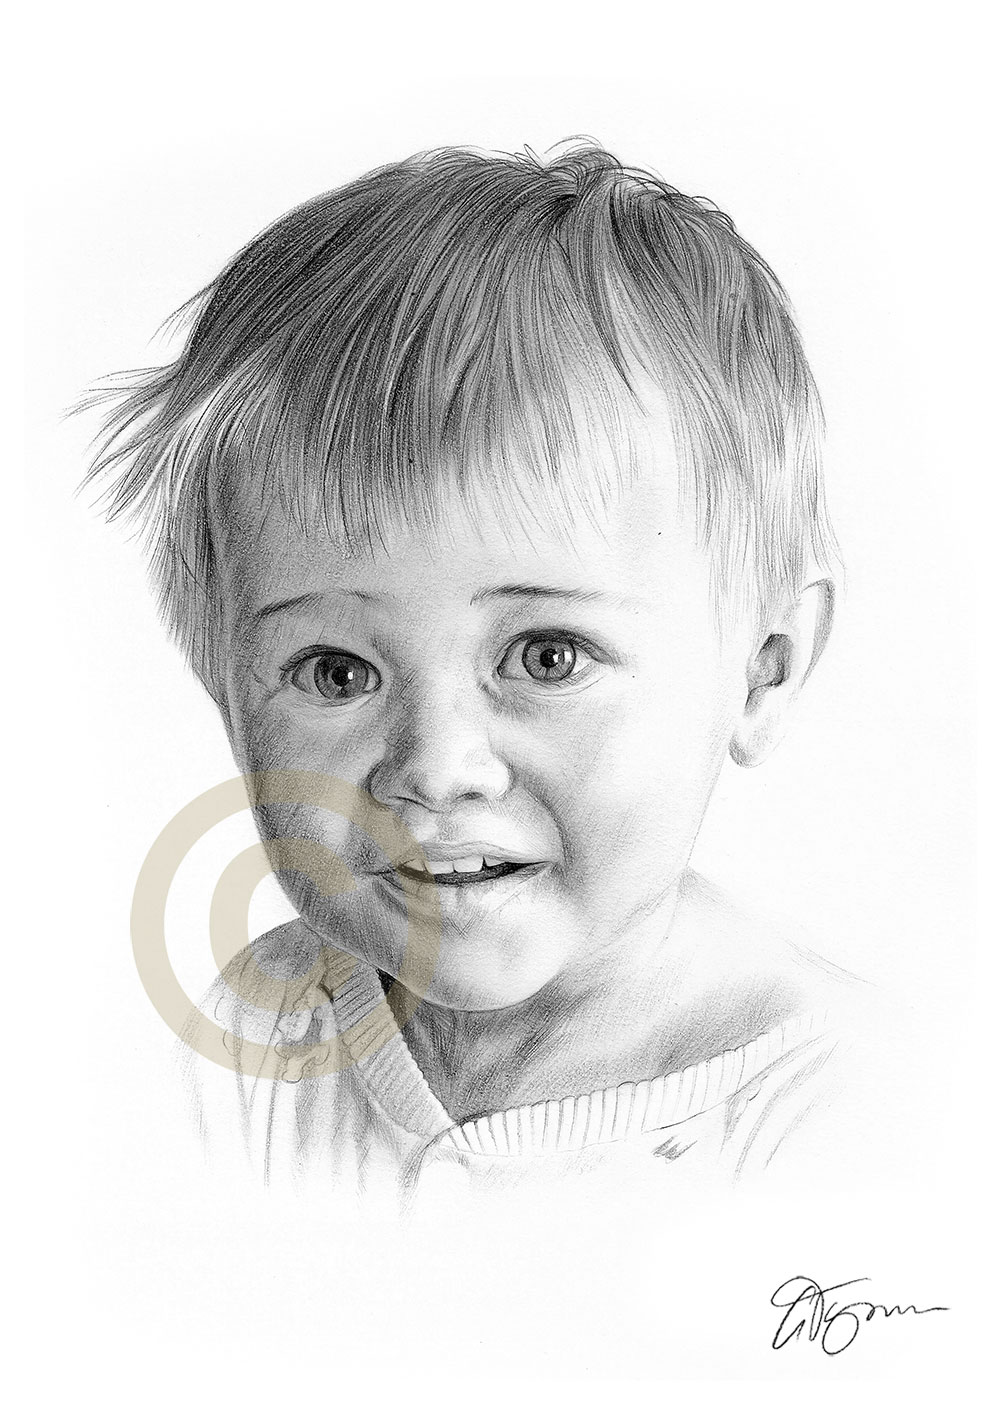 Pencil drawing commission of a young boy by artist Gary Tymon